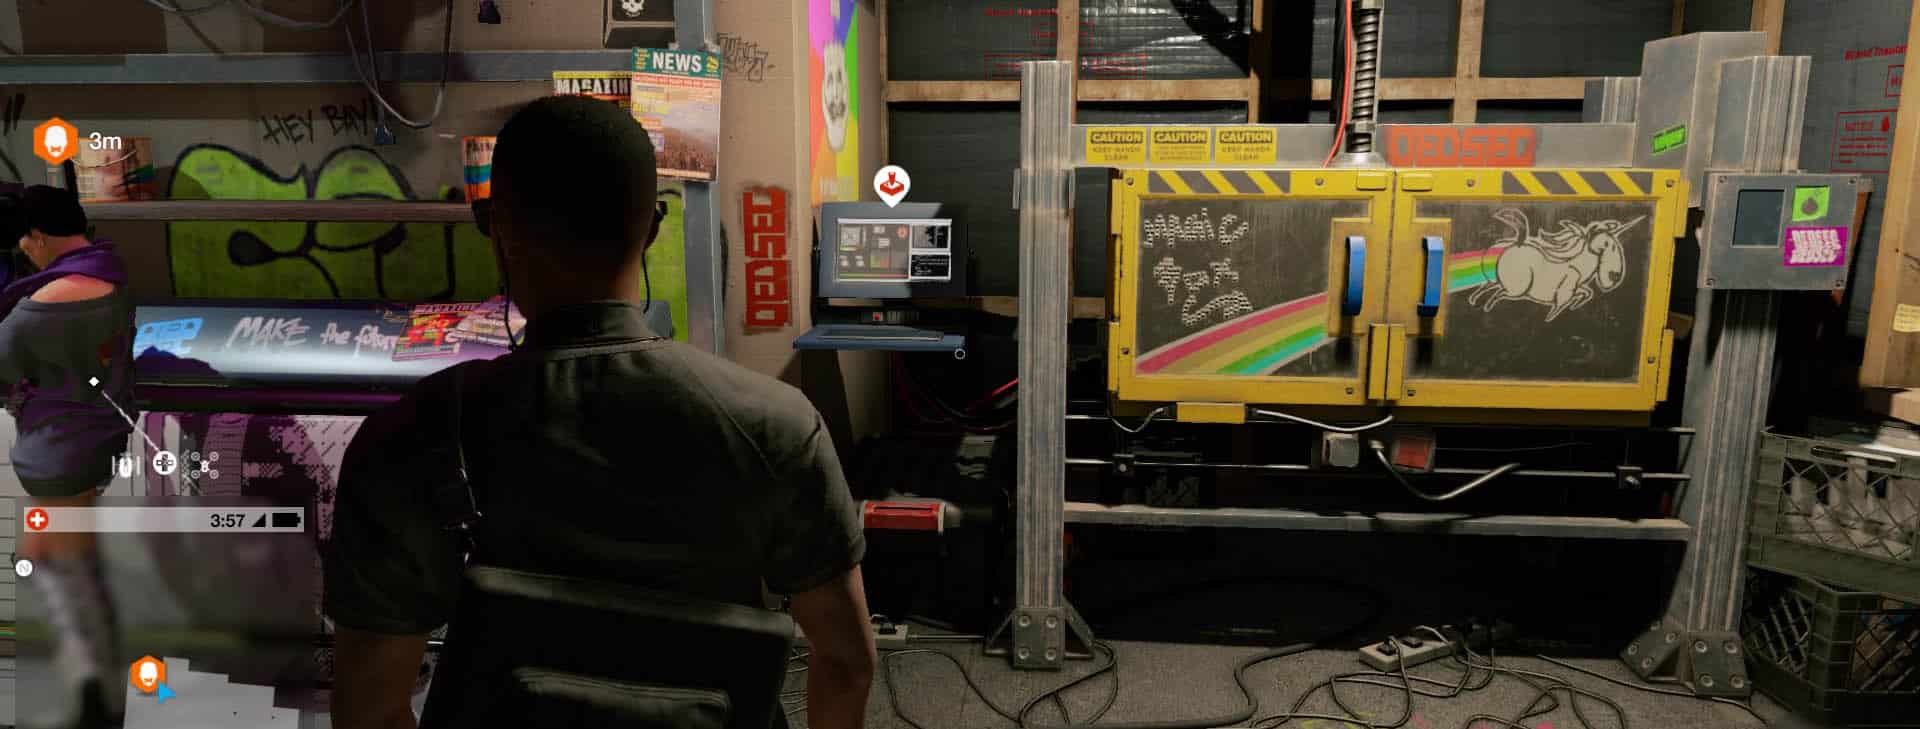 Hackerspace 3D Printer In Watch Dogs 2